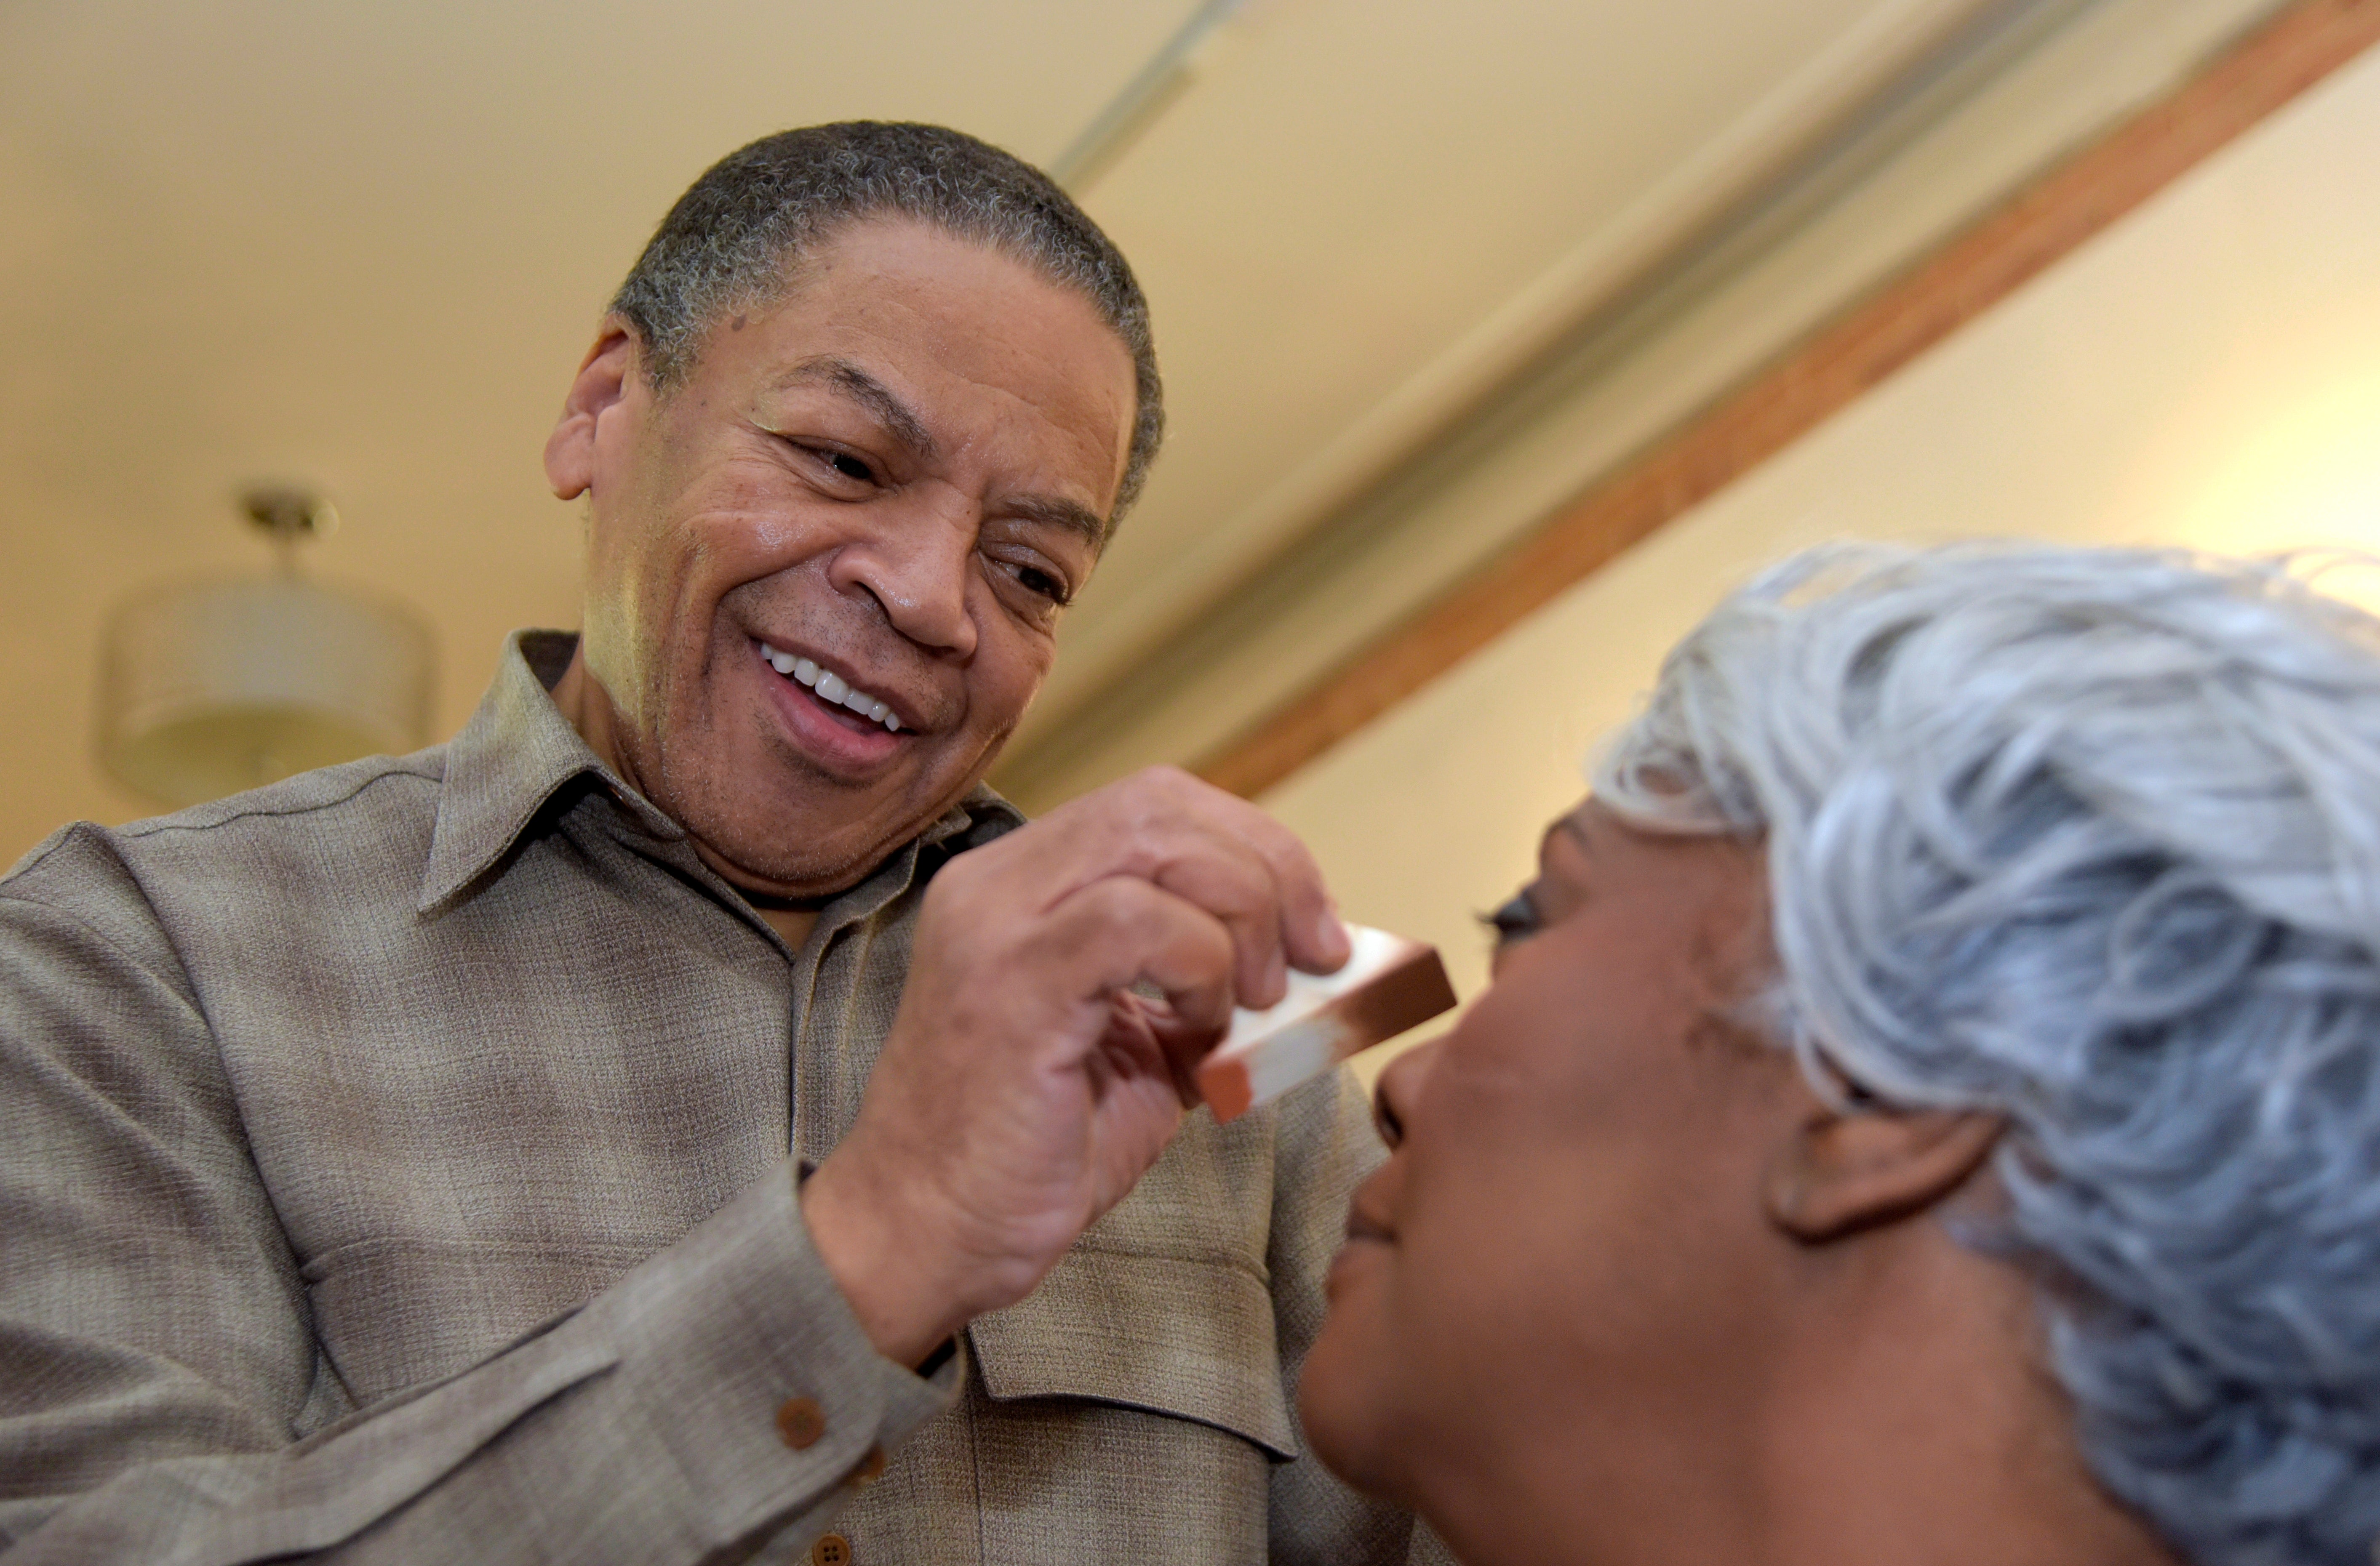 Oprah Winfrey's Former Makeup Artist Gives Free Makeovers In His Hometown
